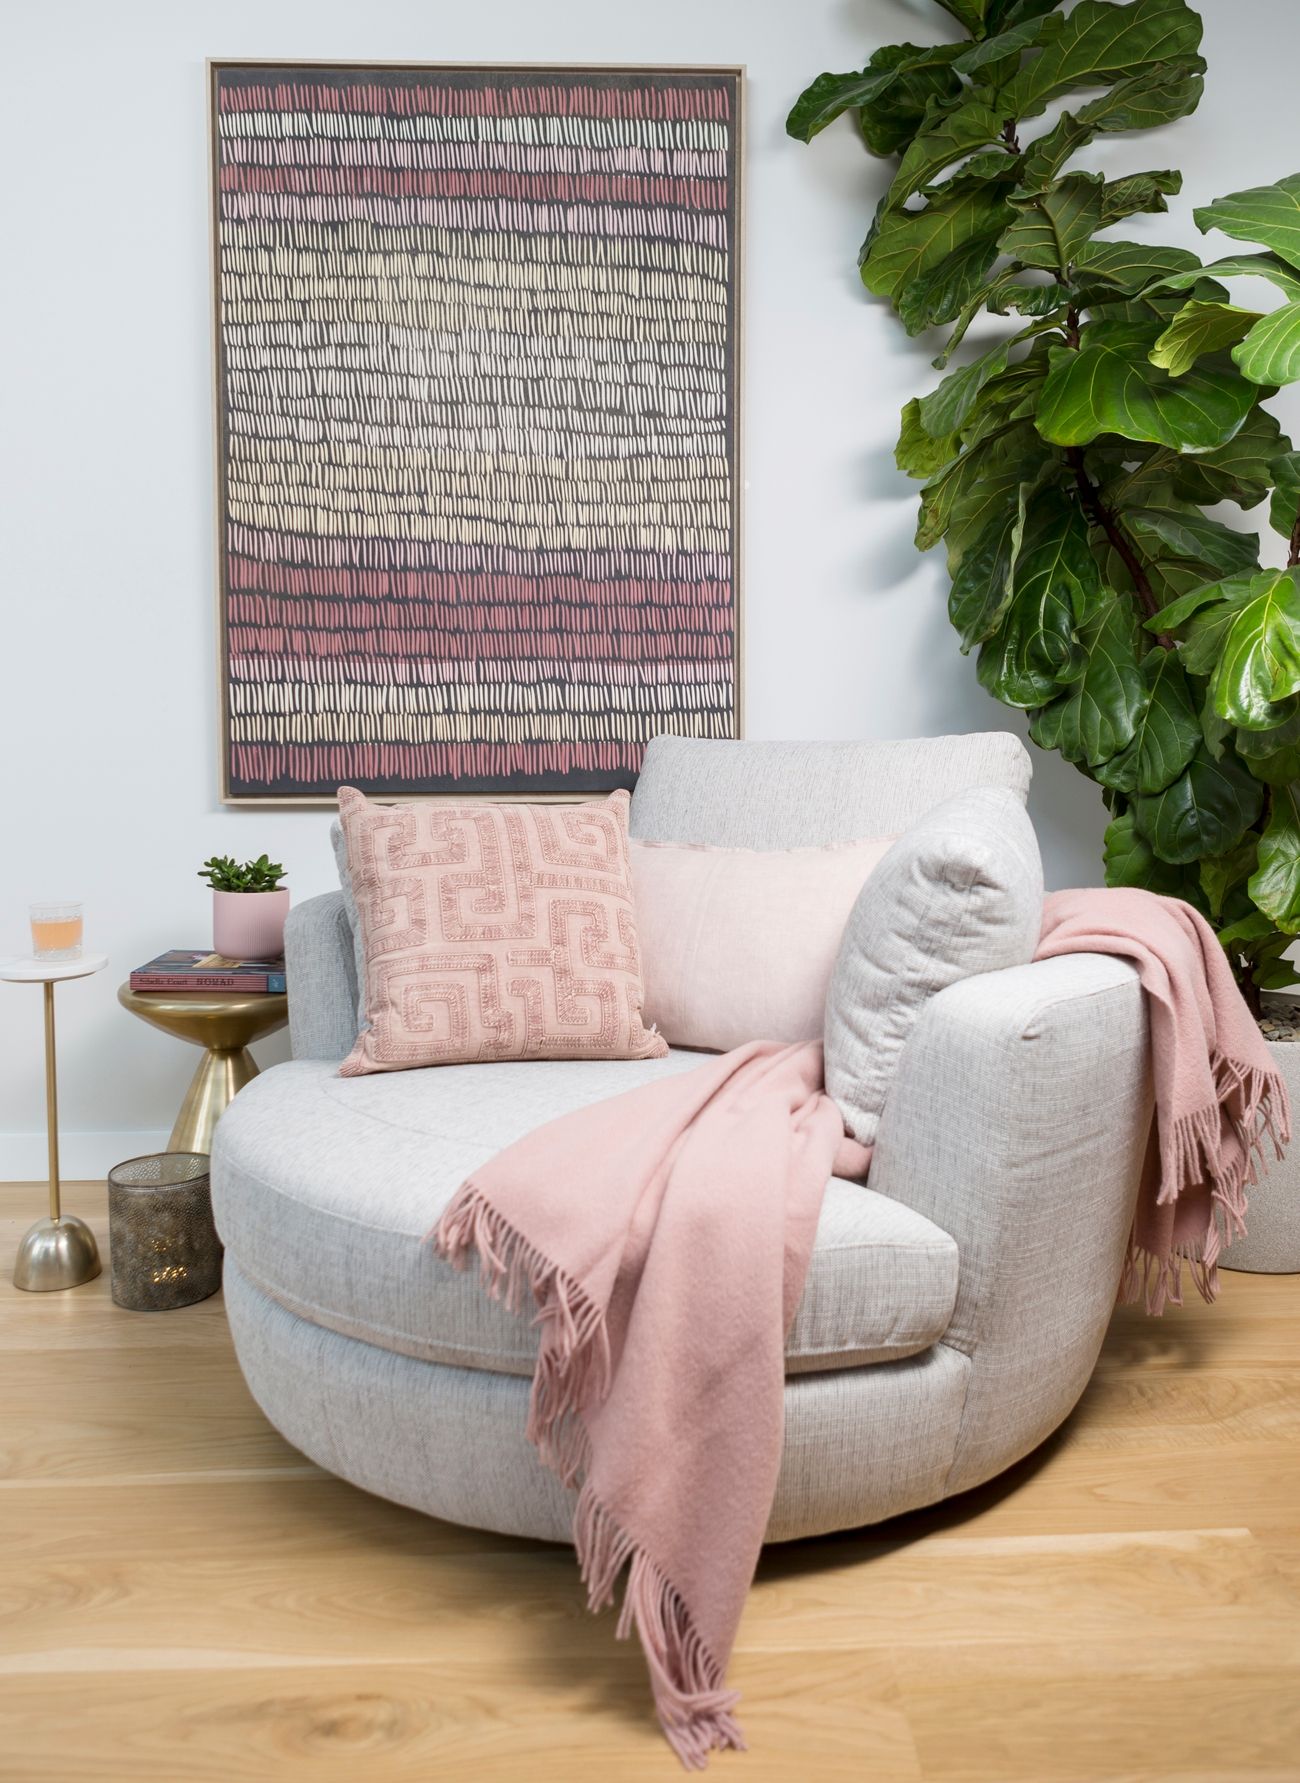 Choosing the Perfect Sofa Chair for Your
Bedroom